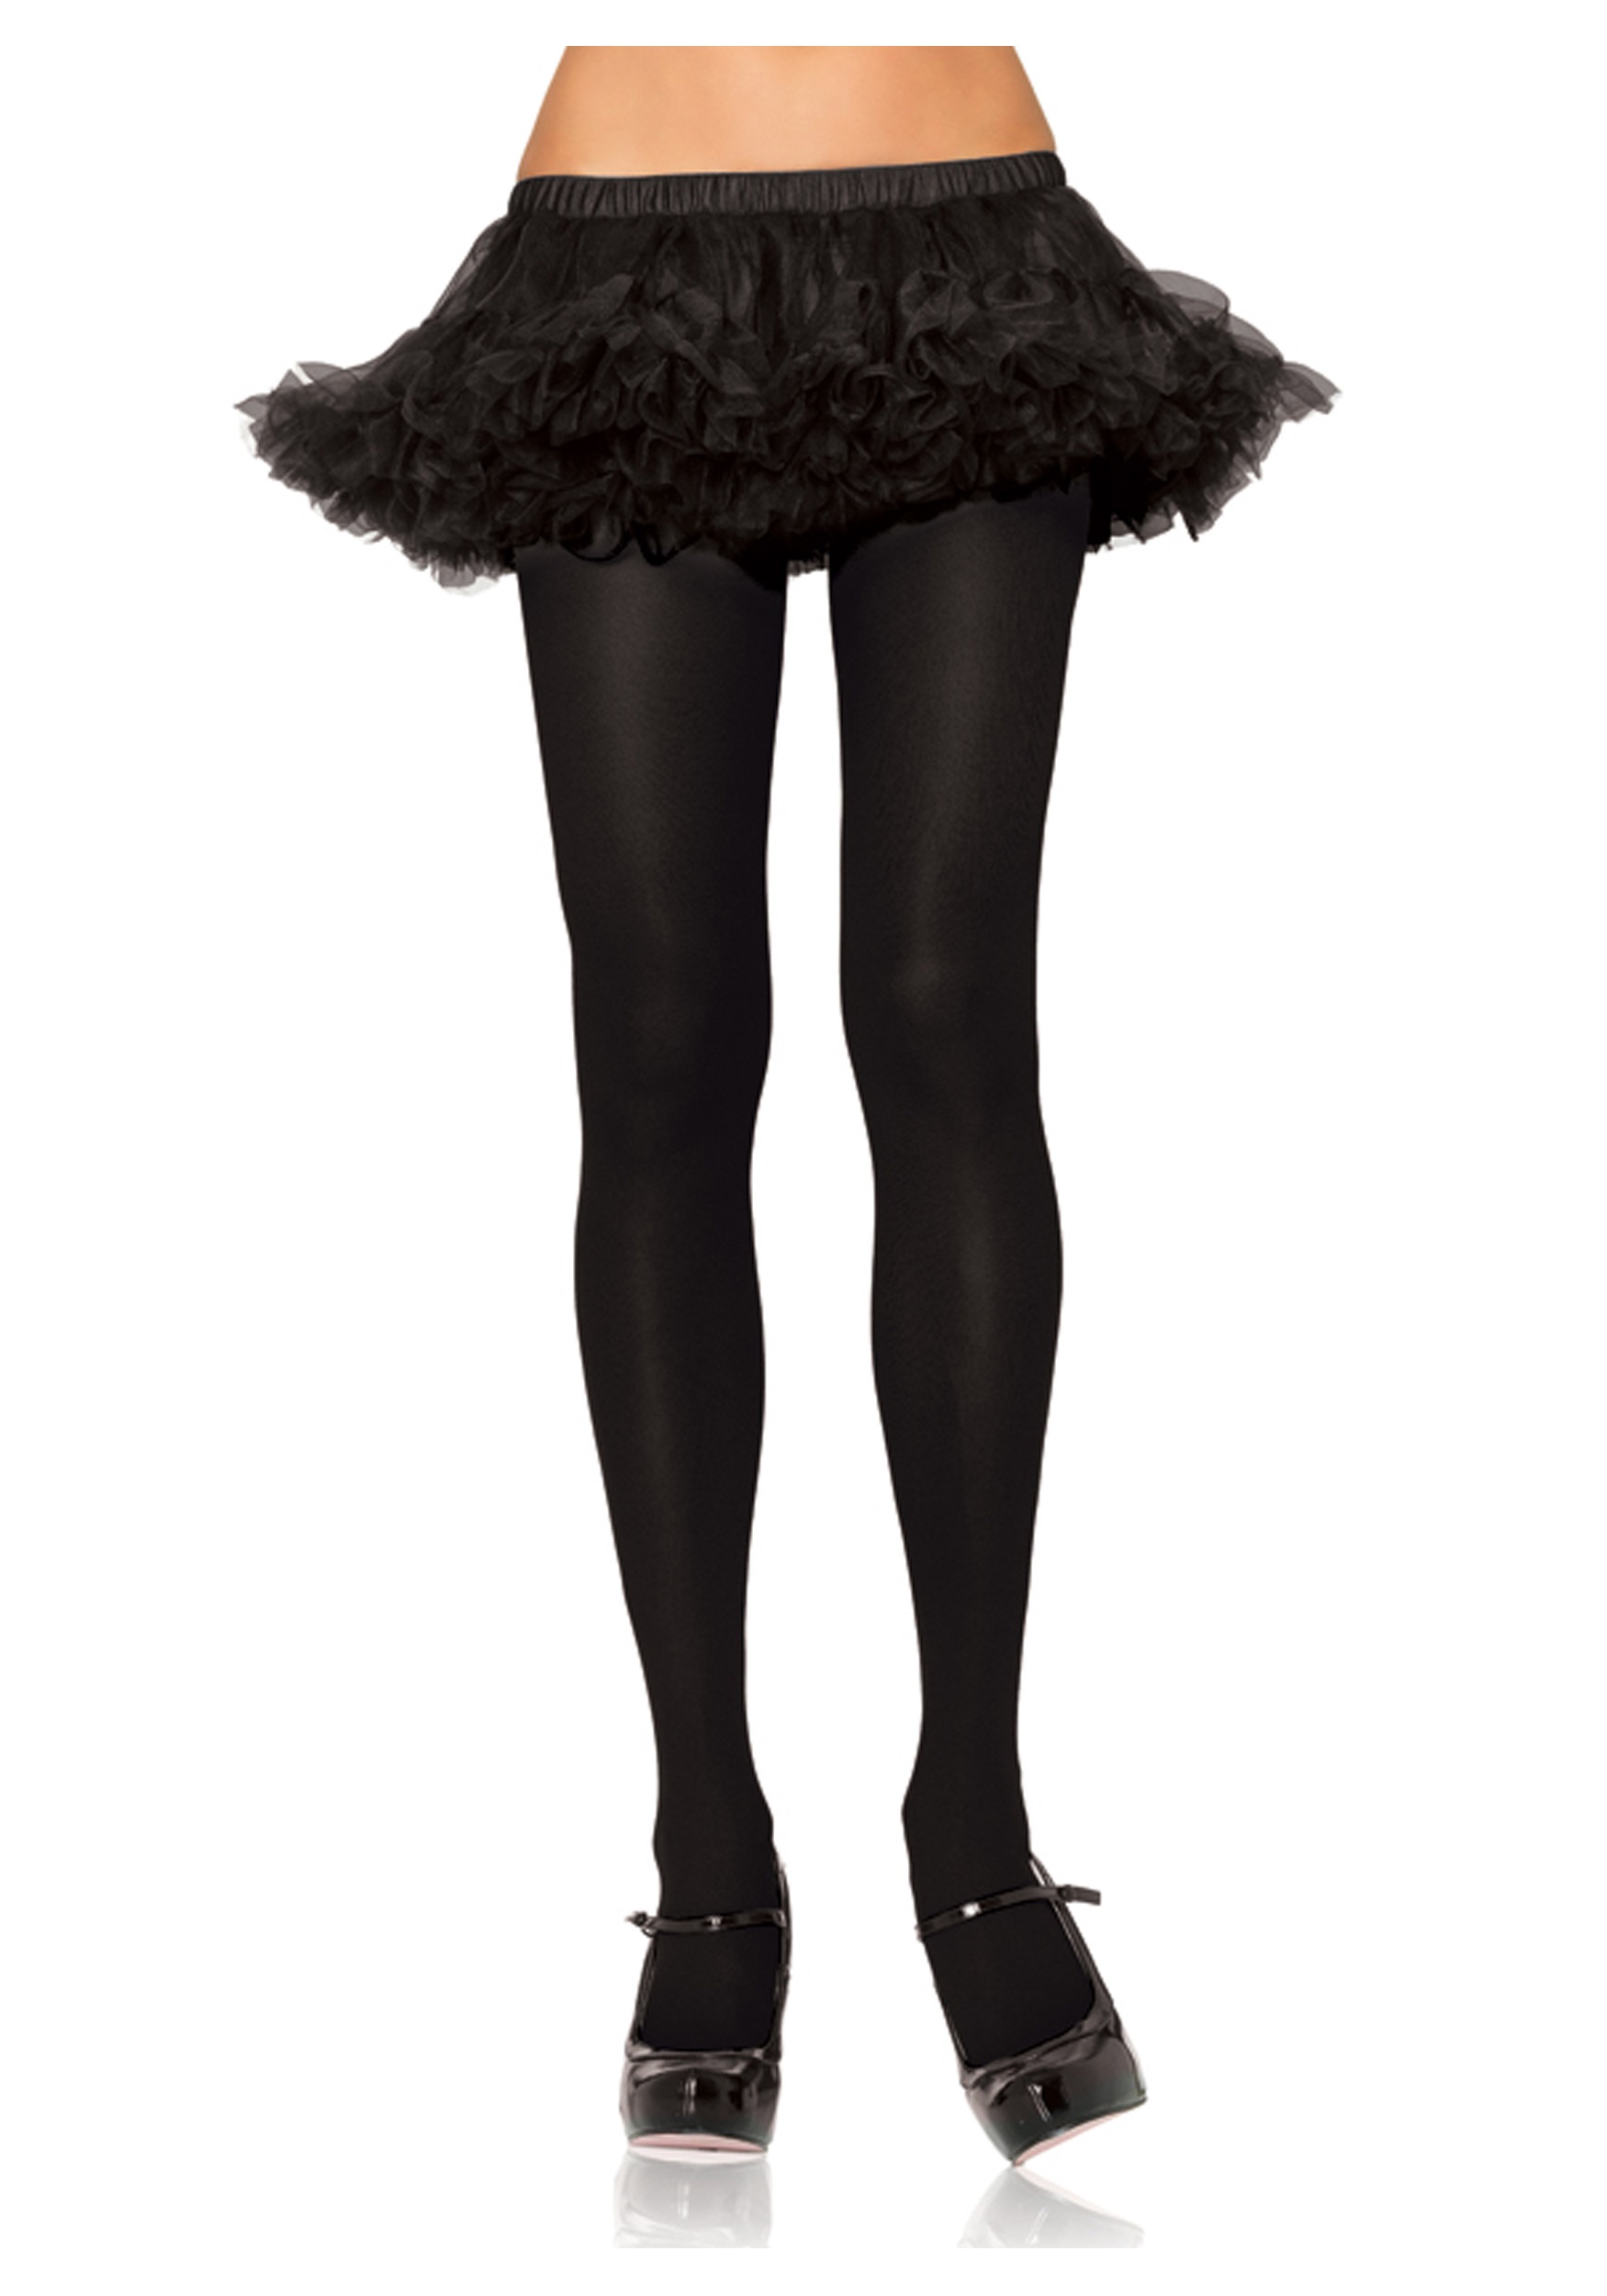 https://images.halloweencostumes.com/products/13721/1-1/plus-size-black-tights.jpg